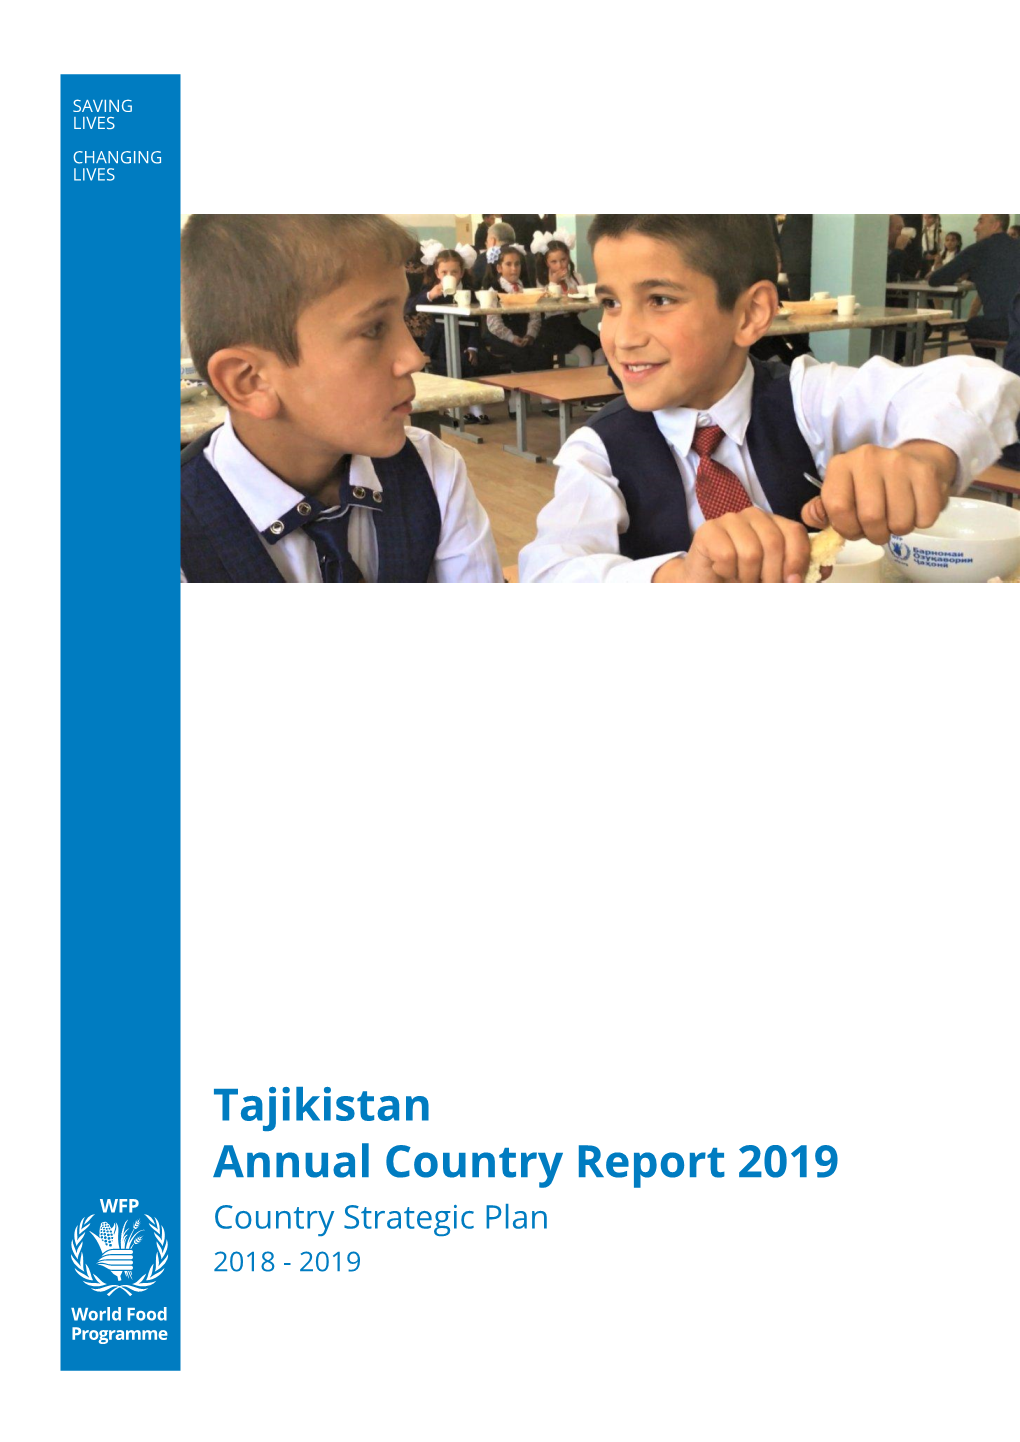 Tajikistan Annual Country Report 2019 Country Strategic Plan 2018 - 2019 Table of Contents